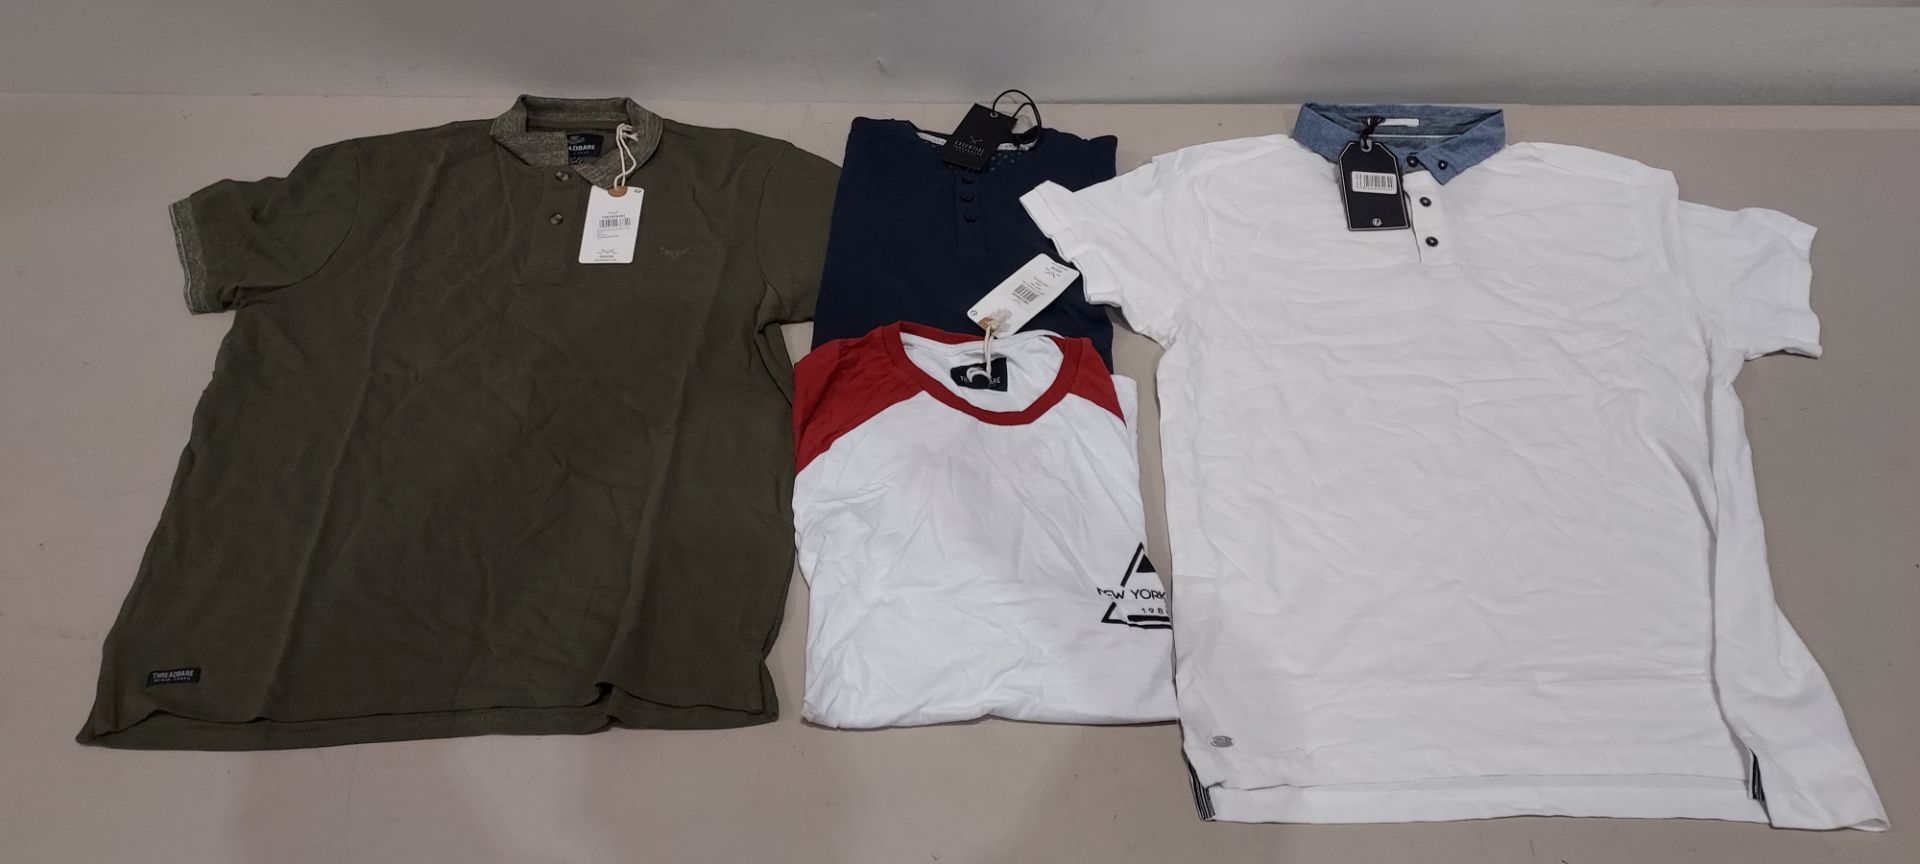 23 X PIECE BRAND NEW LOT CONTAINING MIXED THREADBARE MEN'S PK T SHIRTS & POLO TOPS IN NAVY , OLIVE